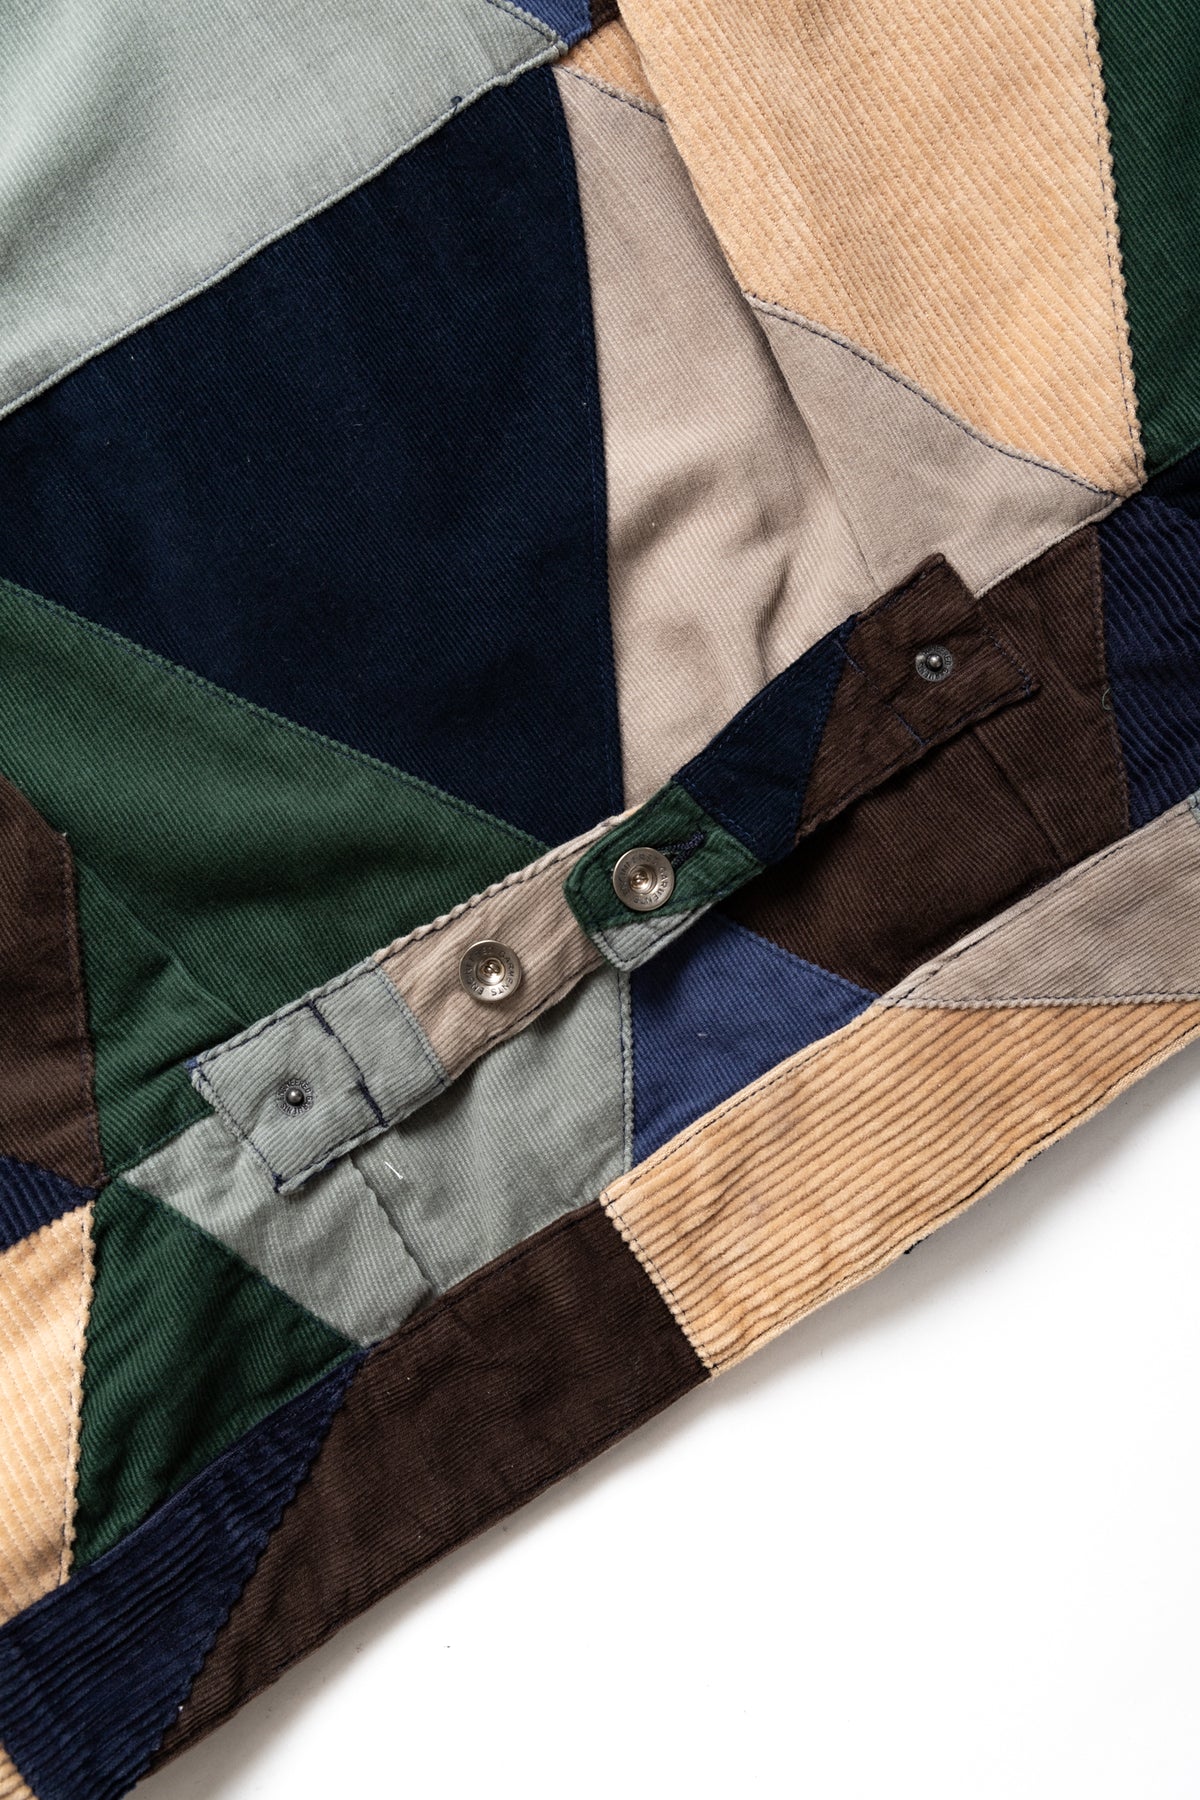 Engineered Garments Patchwork Trucker Jacket in multi-color triangle corduroy 